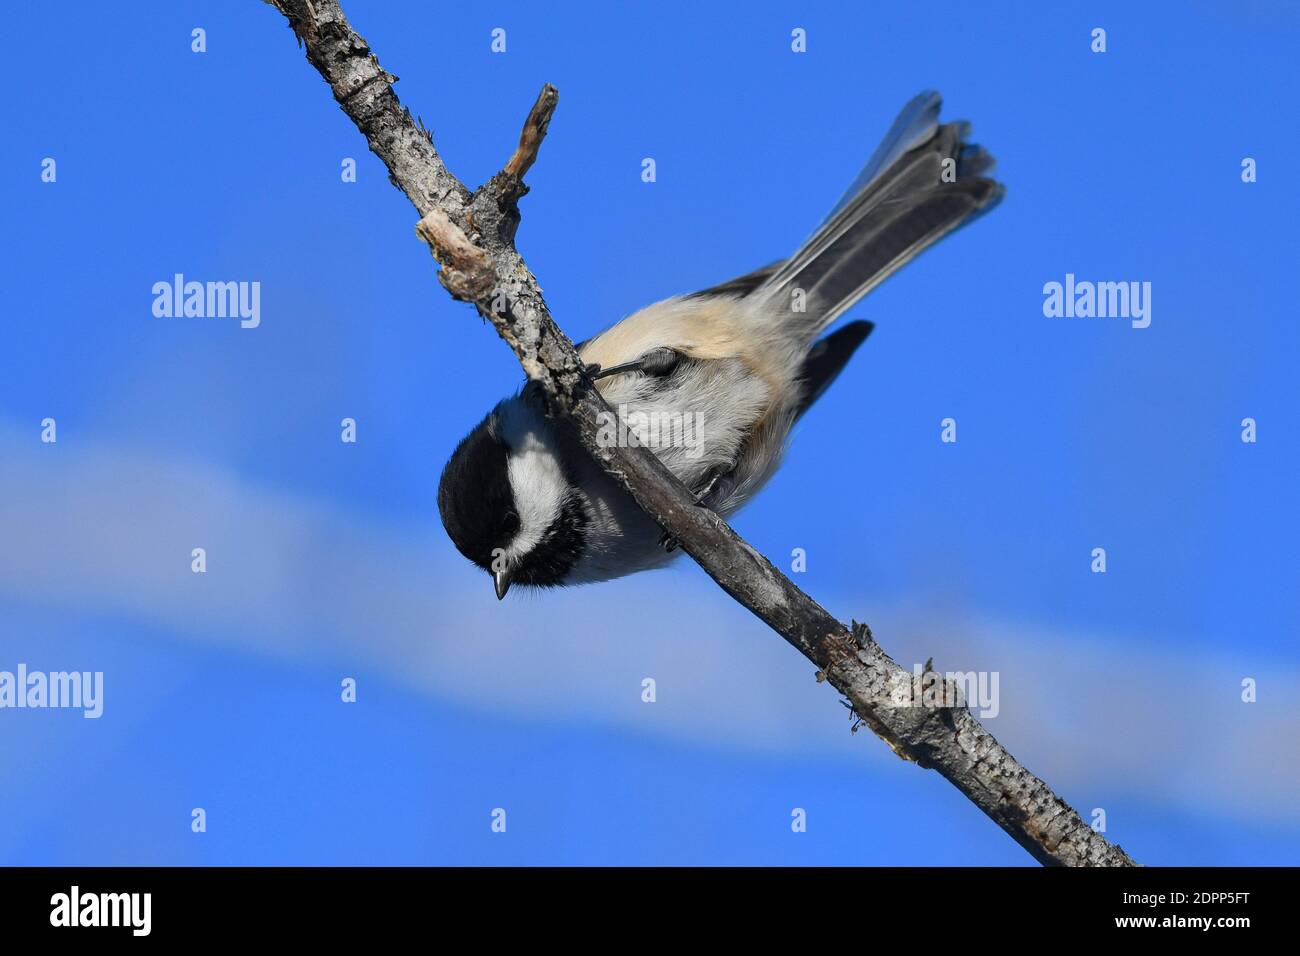 Calgary, Alberta, Canada. 19th Dec, 2020. A Black Capped Chickadee perches on a branch at the Inglewood Bird Sanctuary in Calgary, Alberta. The songbird is found across the northern United States and most of Canada, and is the state bird of Maine and Massachusetts. Credit: Gavin John/ZUMA Wire/Alamy Live News Stock Photo